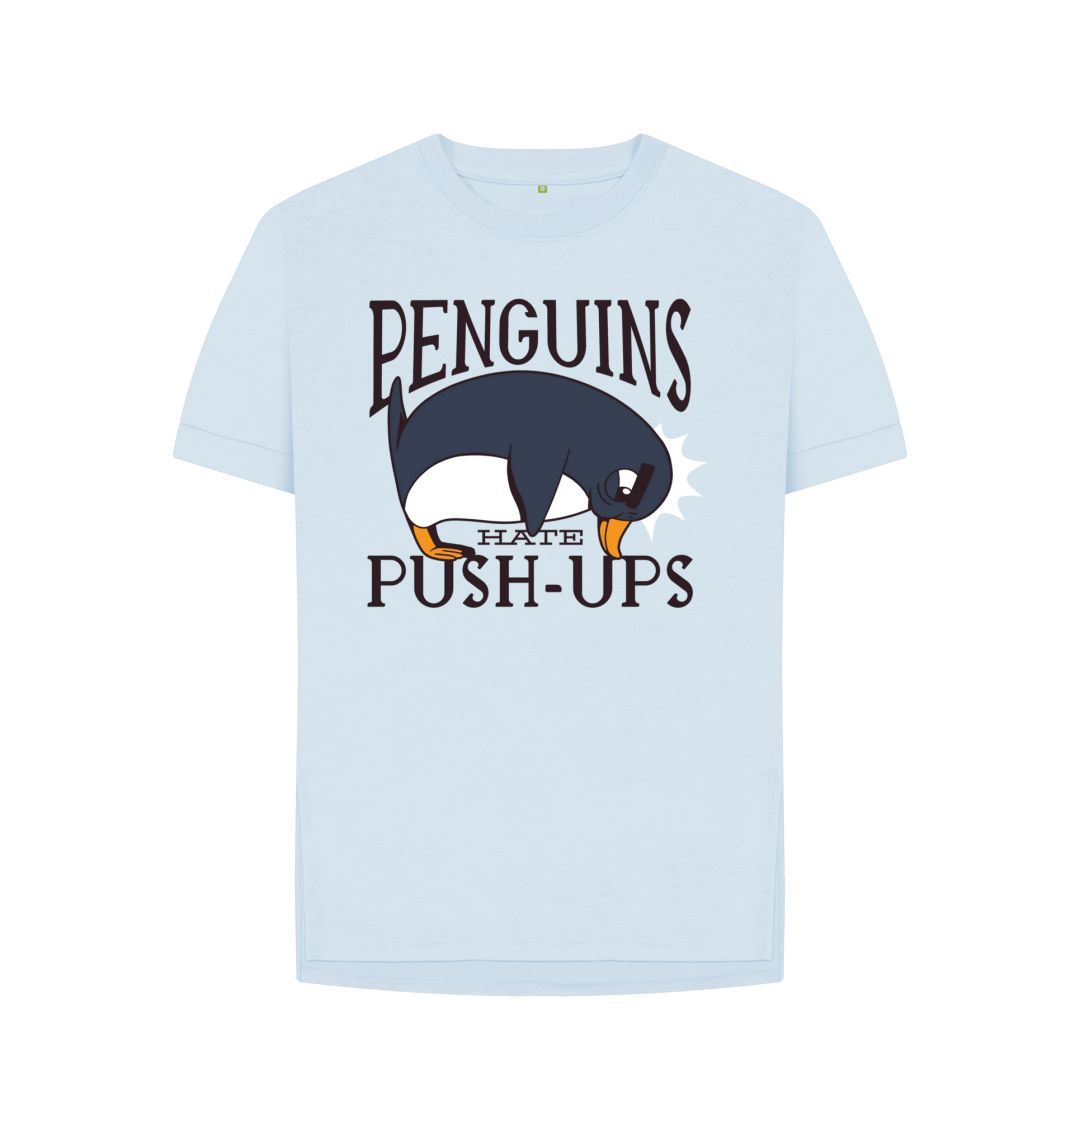 Sky Blue Penguins Hate Push-Ups Women's Relaxed Fit Tee